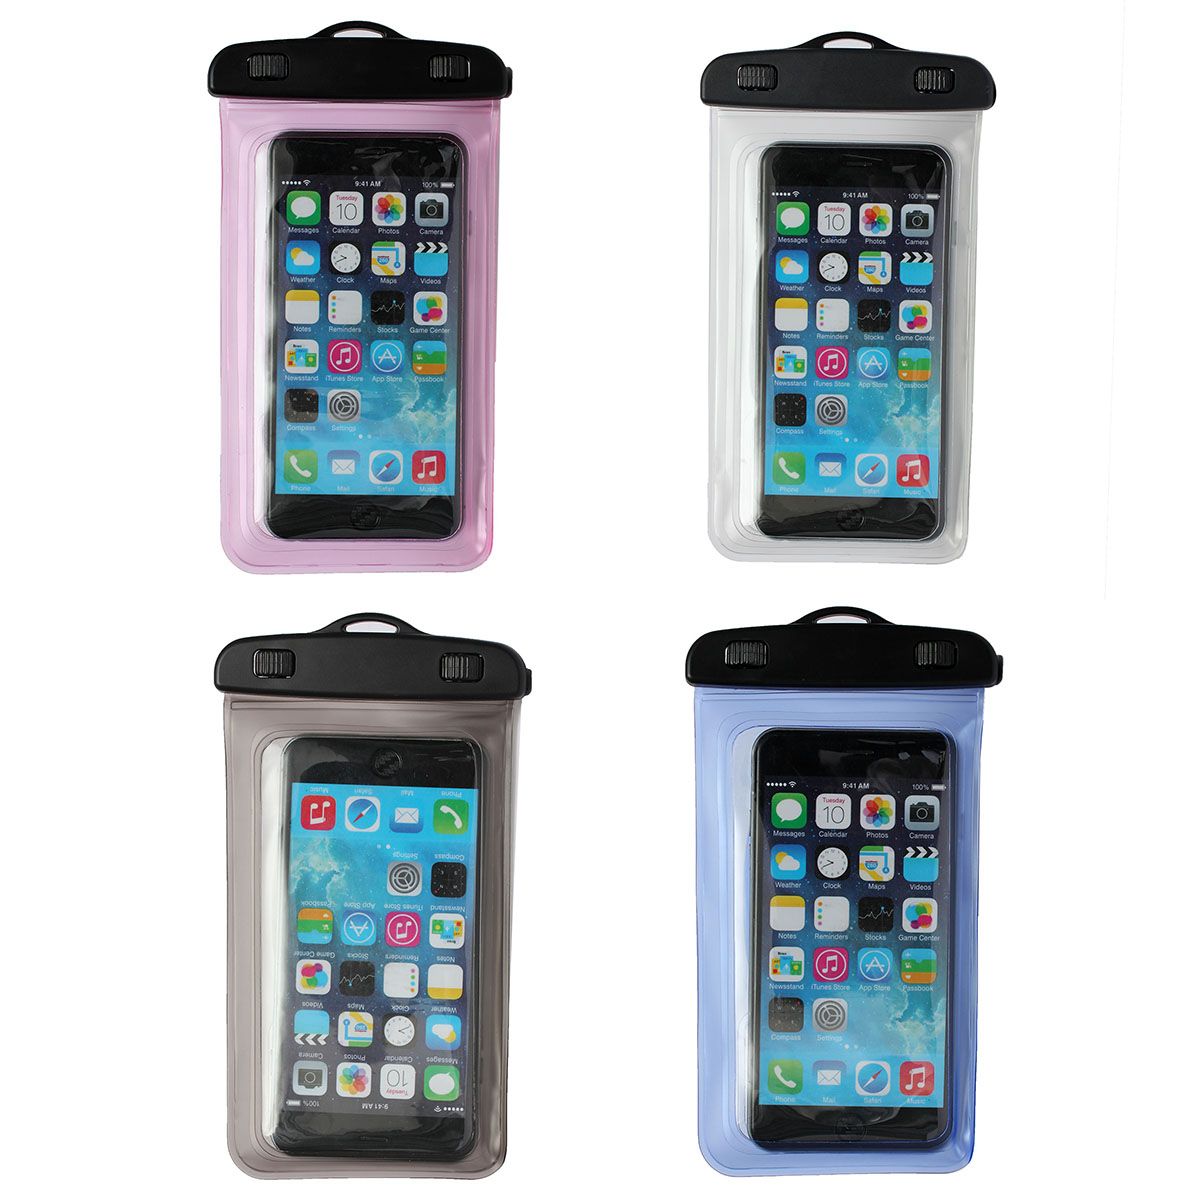 6-Inch-Floatable-Waterproof-Phone-Case-IPX8-Waterproof-Phone-Pouch-Dry-Bag-for-Any-Phone-in-6inch-1630570